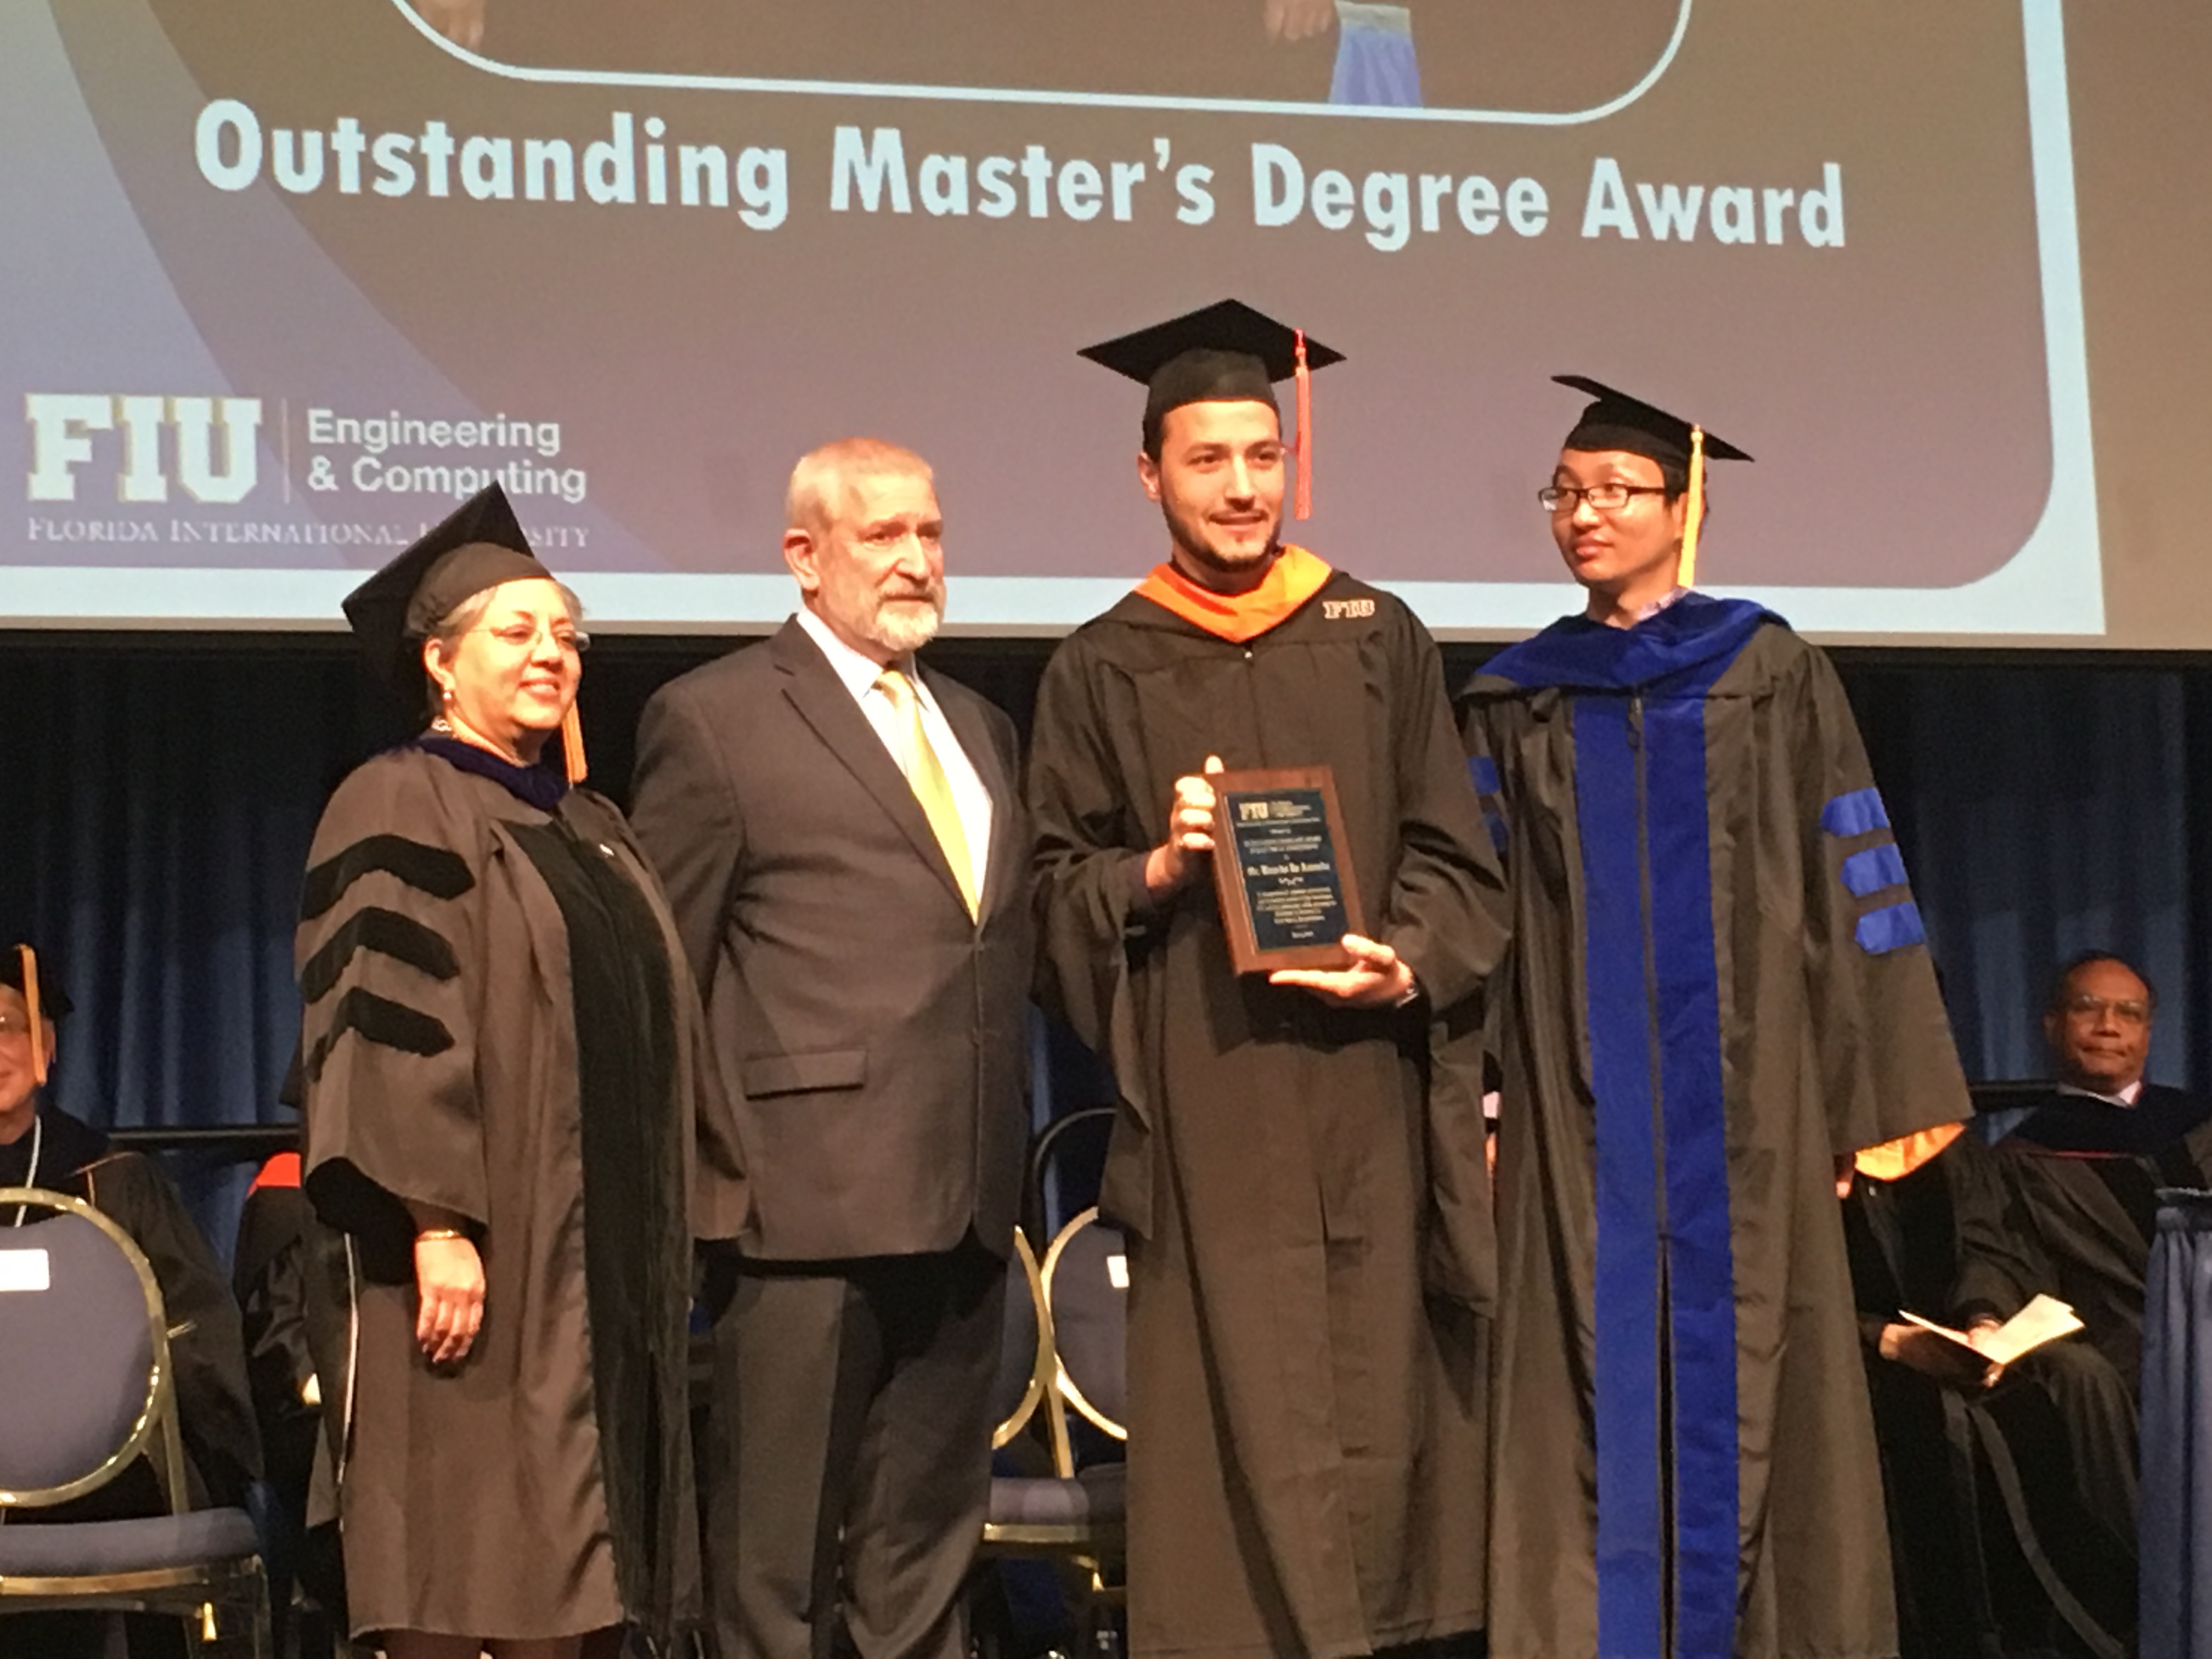 Our Masters student Ricardo de Azevedo receive the Outstanding MS Graduate Award during the Graduation Ceremony held at FIU, Spring, 2016